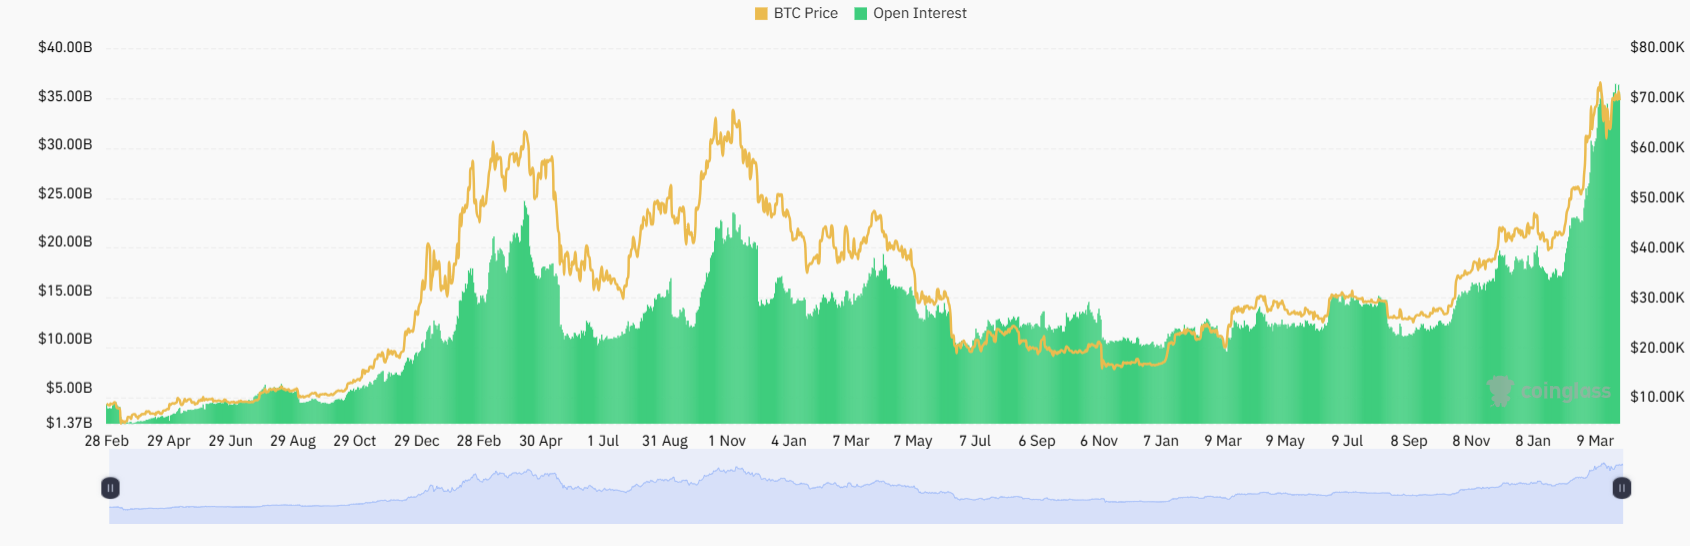 Market research report: Bitcoin price consolidates around $70,000, Gold & Stocks hit ATHs - Picture4